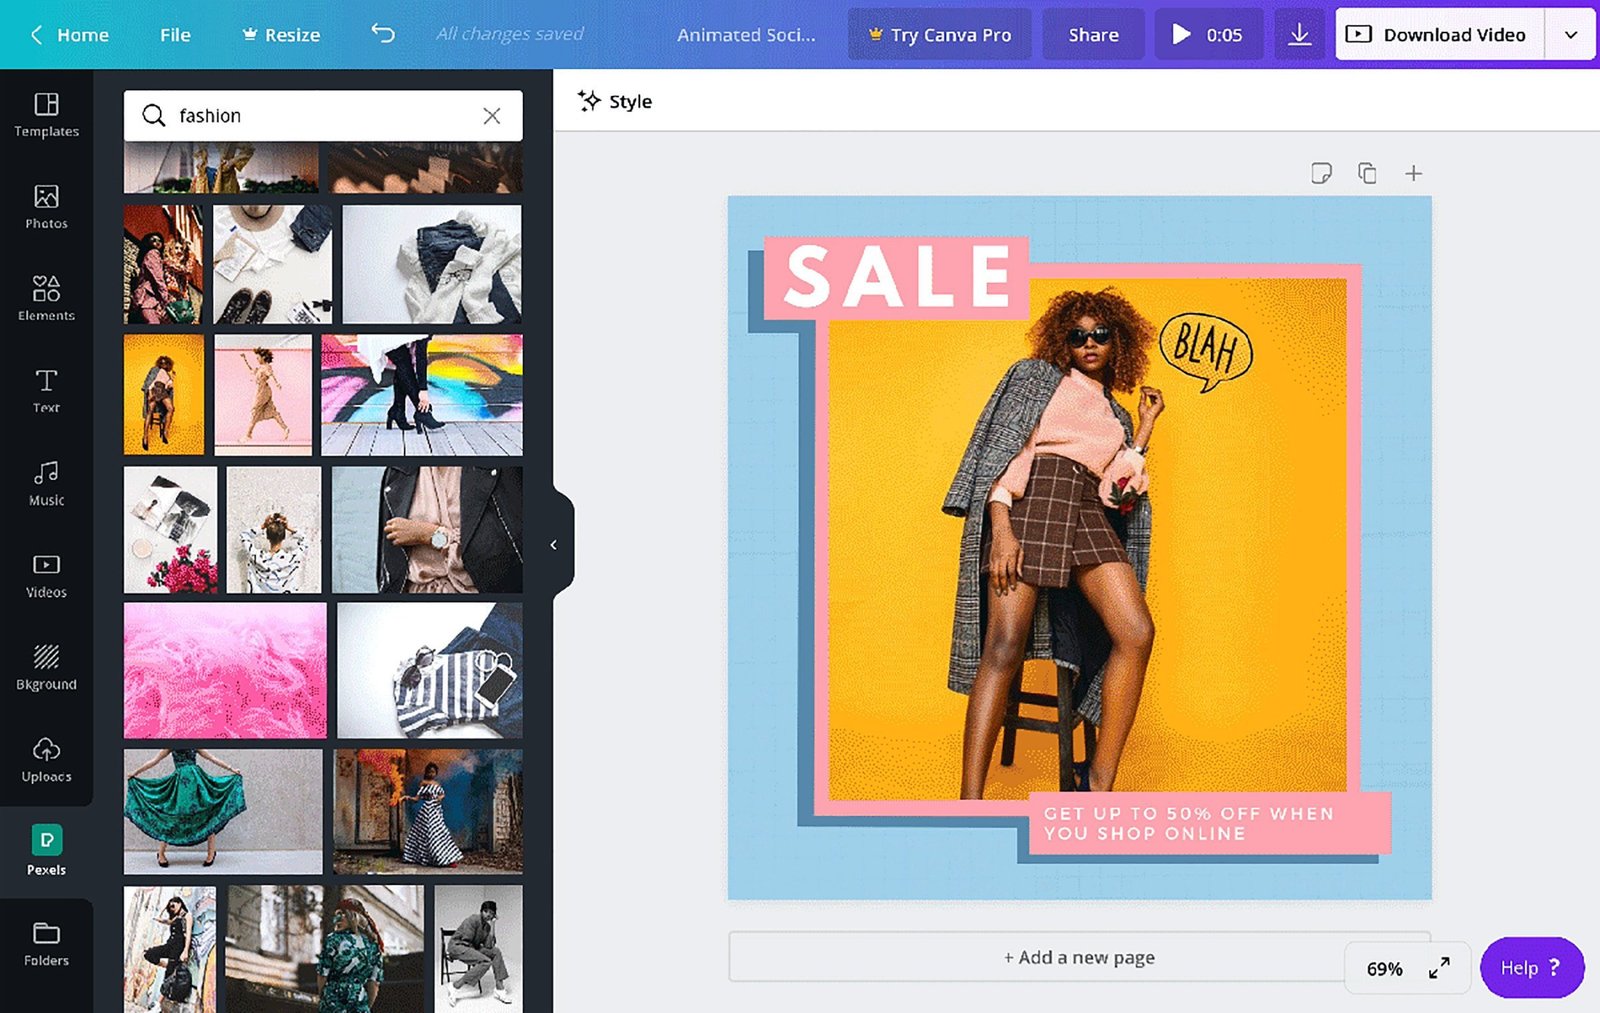 10 Marketing Tools for Small Businesses and Entrepreneurs: Canva